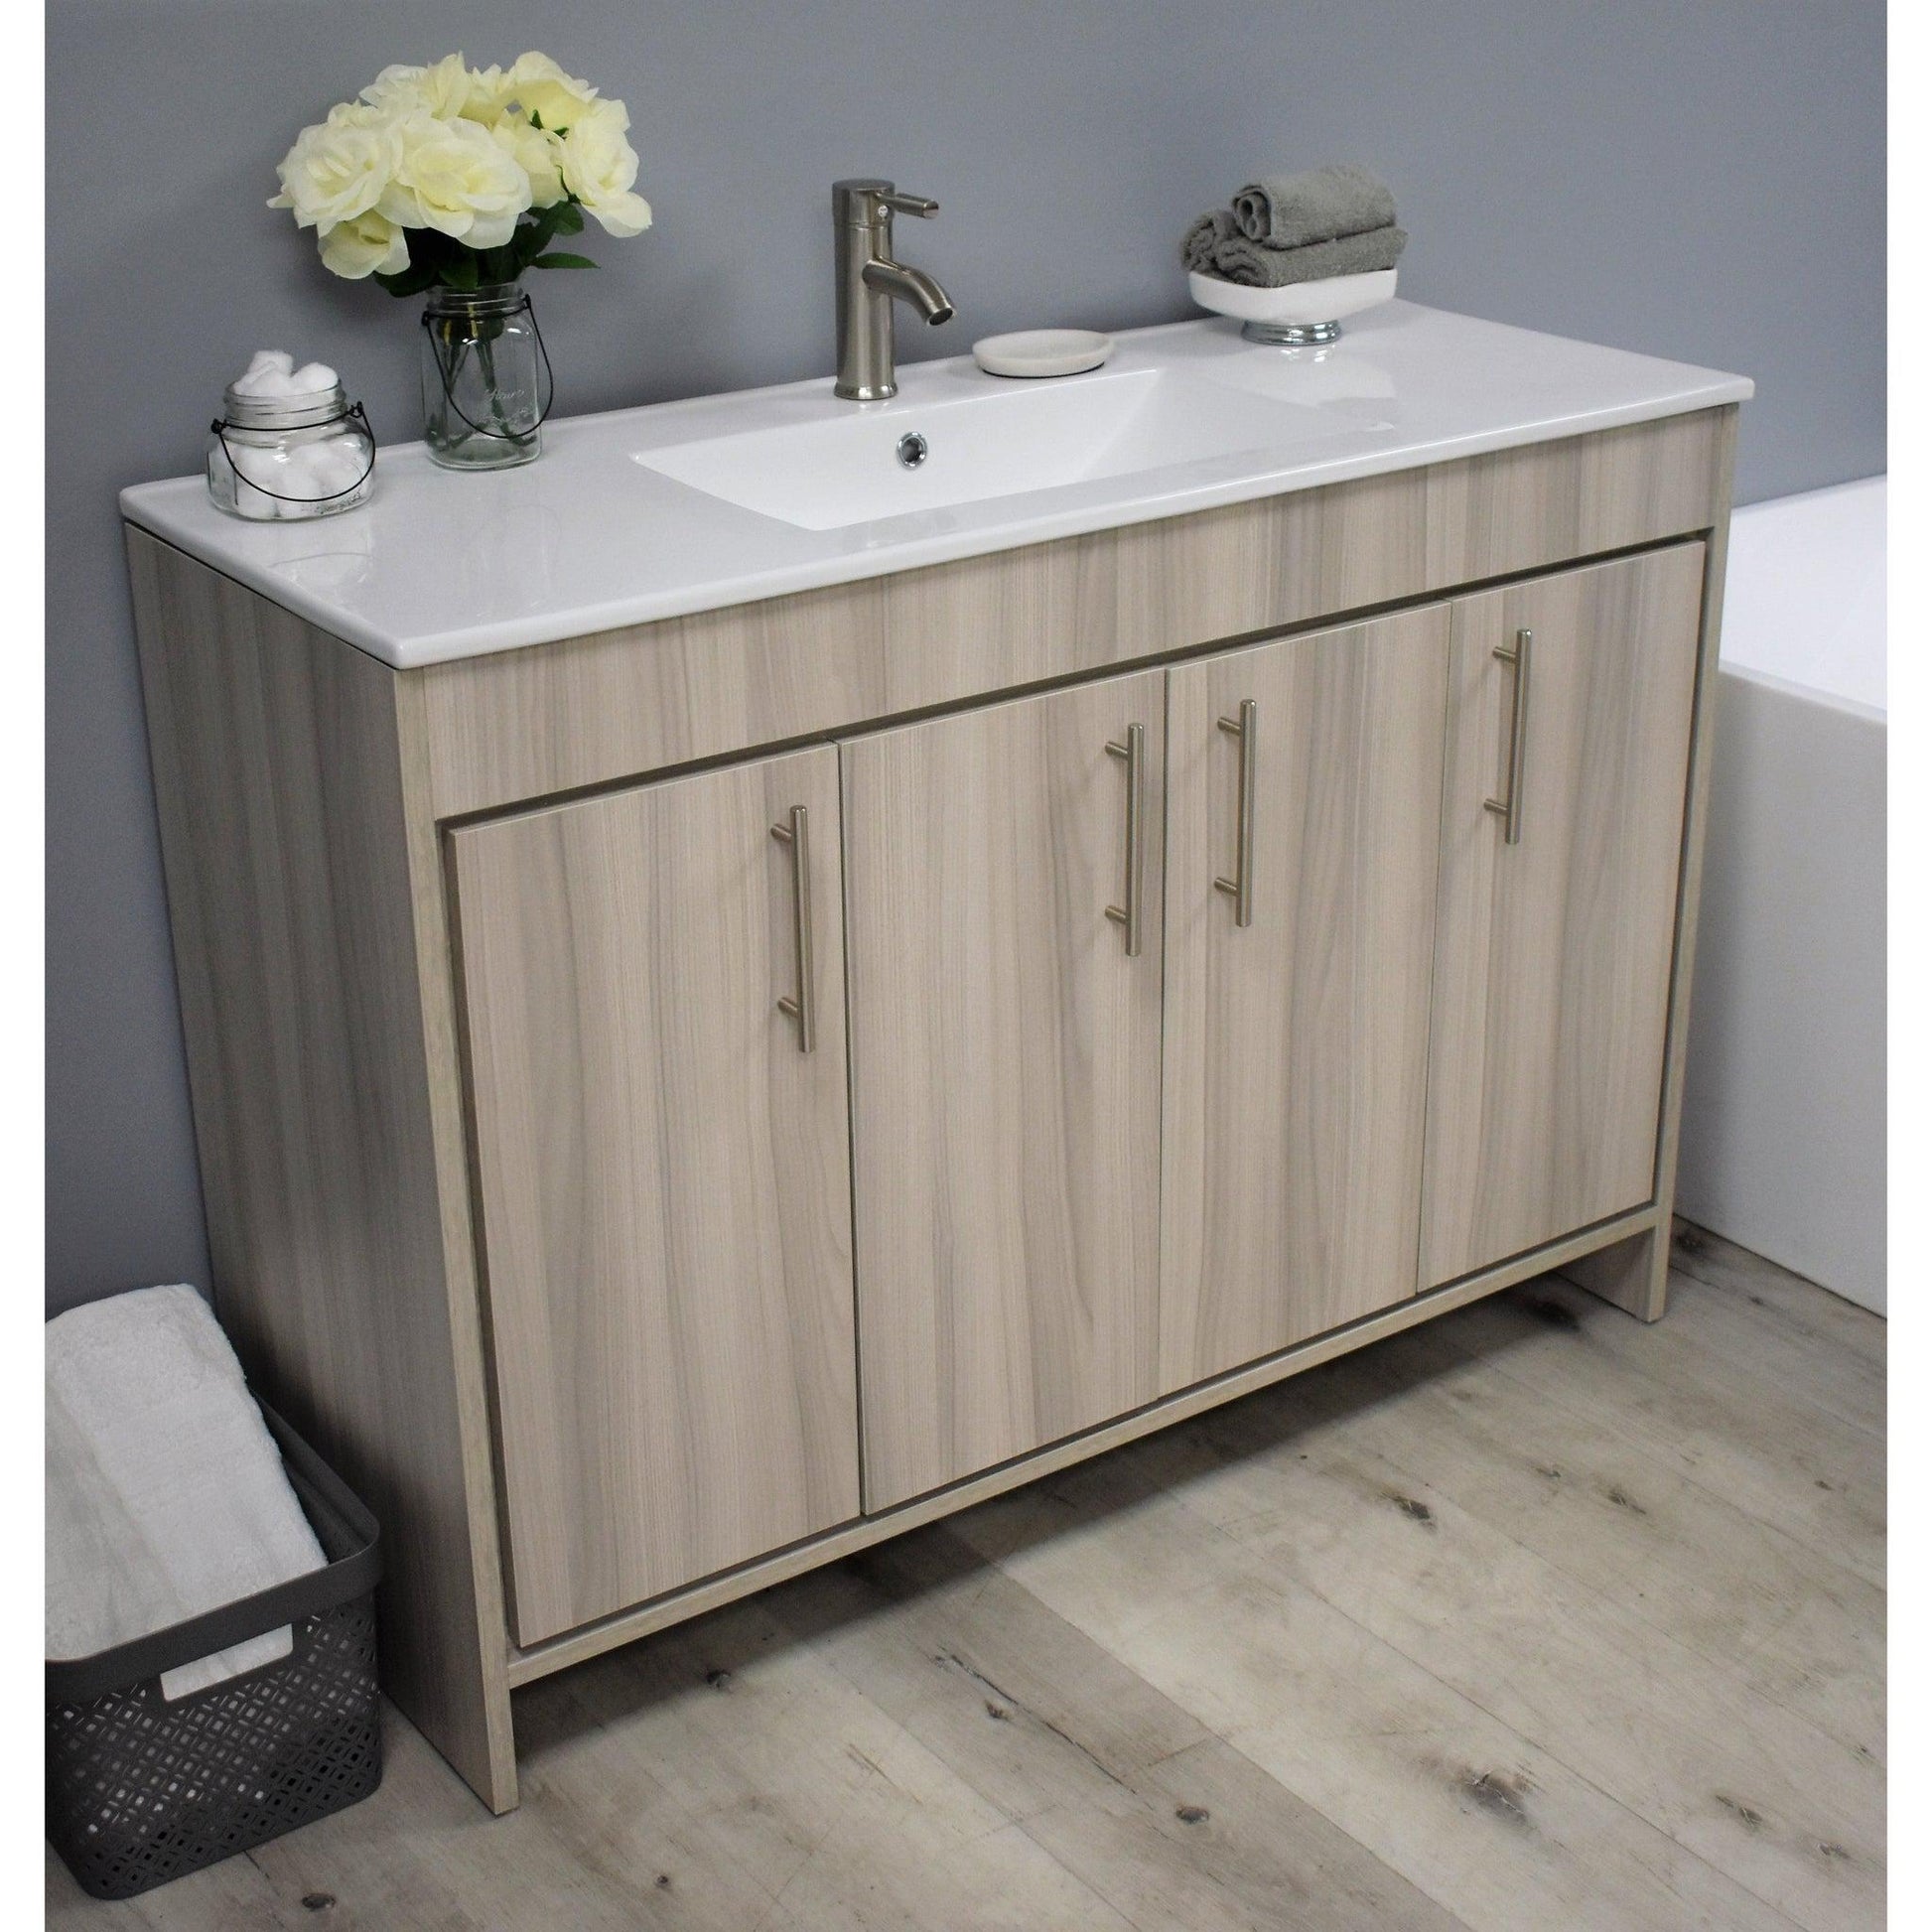 Volpa USA Villa 48" Ash Gray Freestanding Modern Bathroom Vanity With Integrated Ceramic Top and Brushed Nickel Round Handles